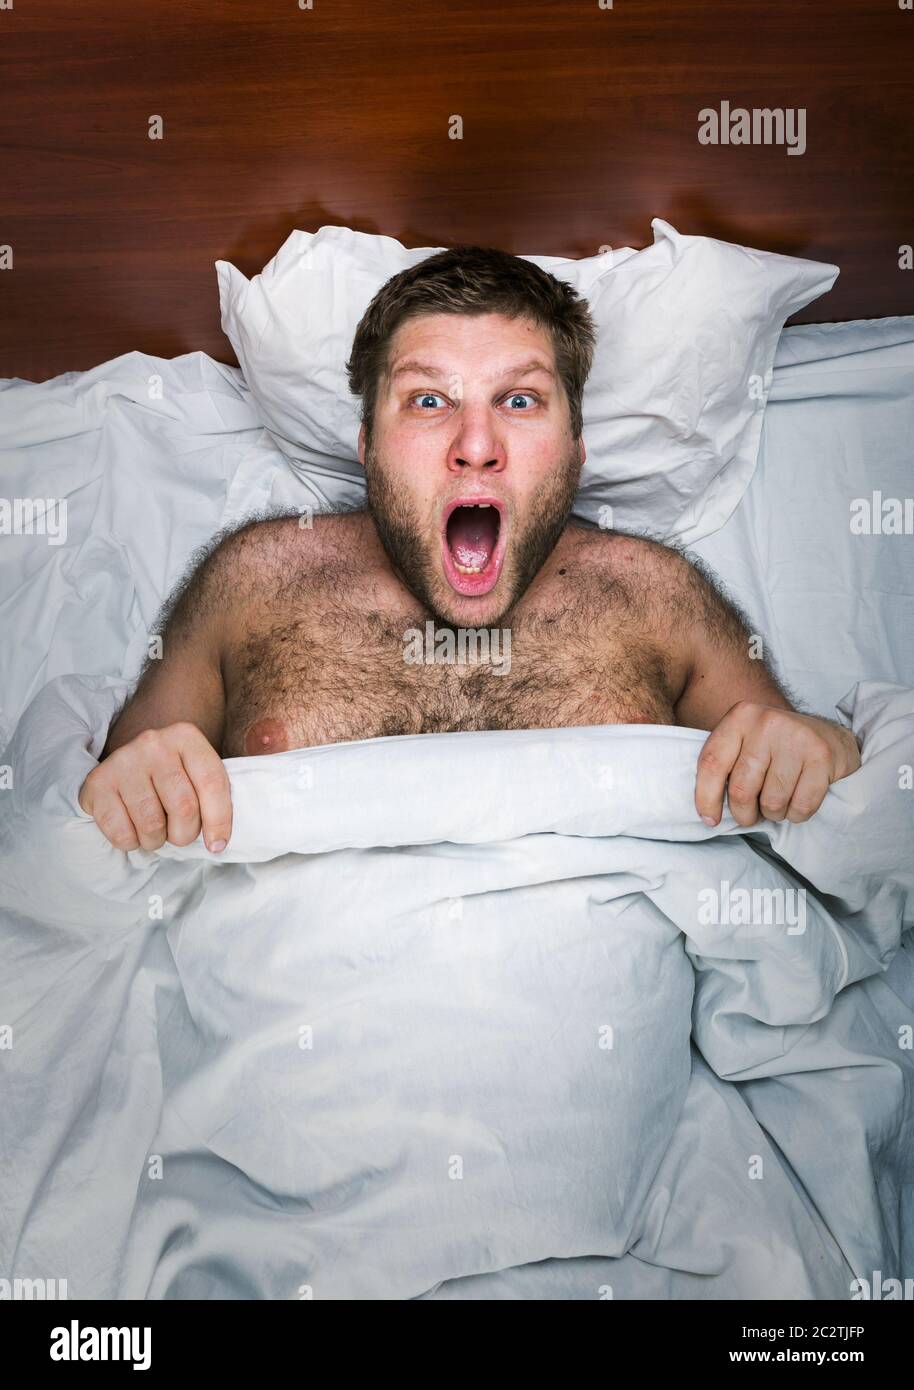 Top view of surprised man in white bed Stock Photo